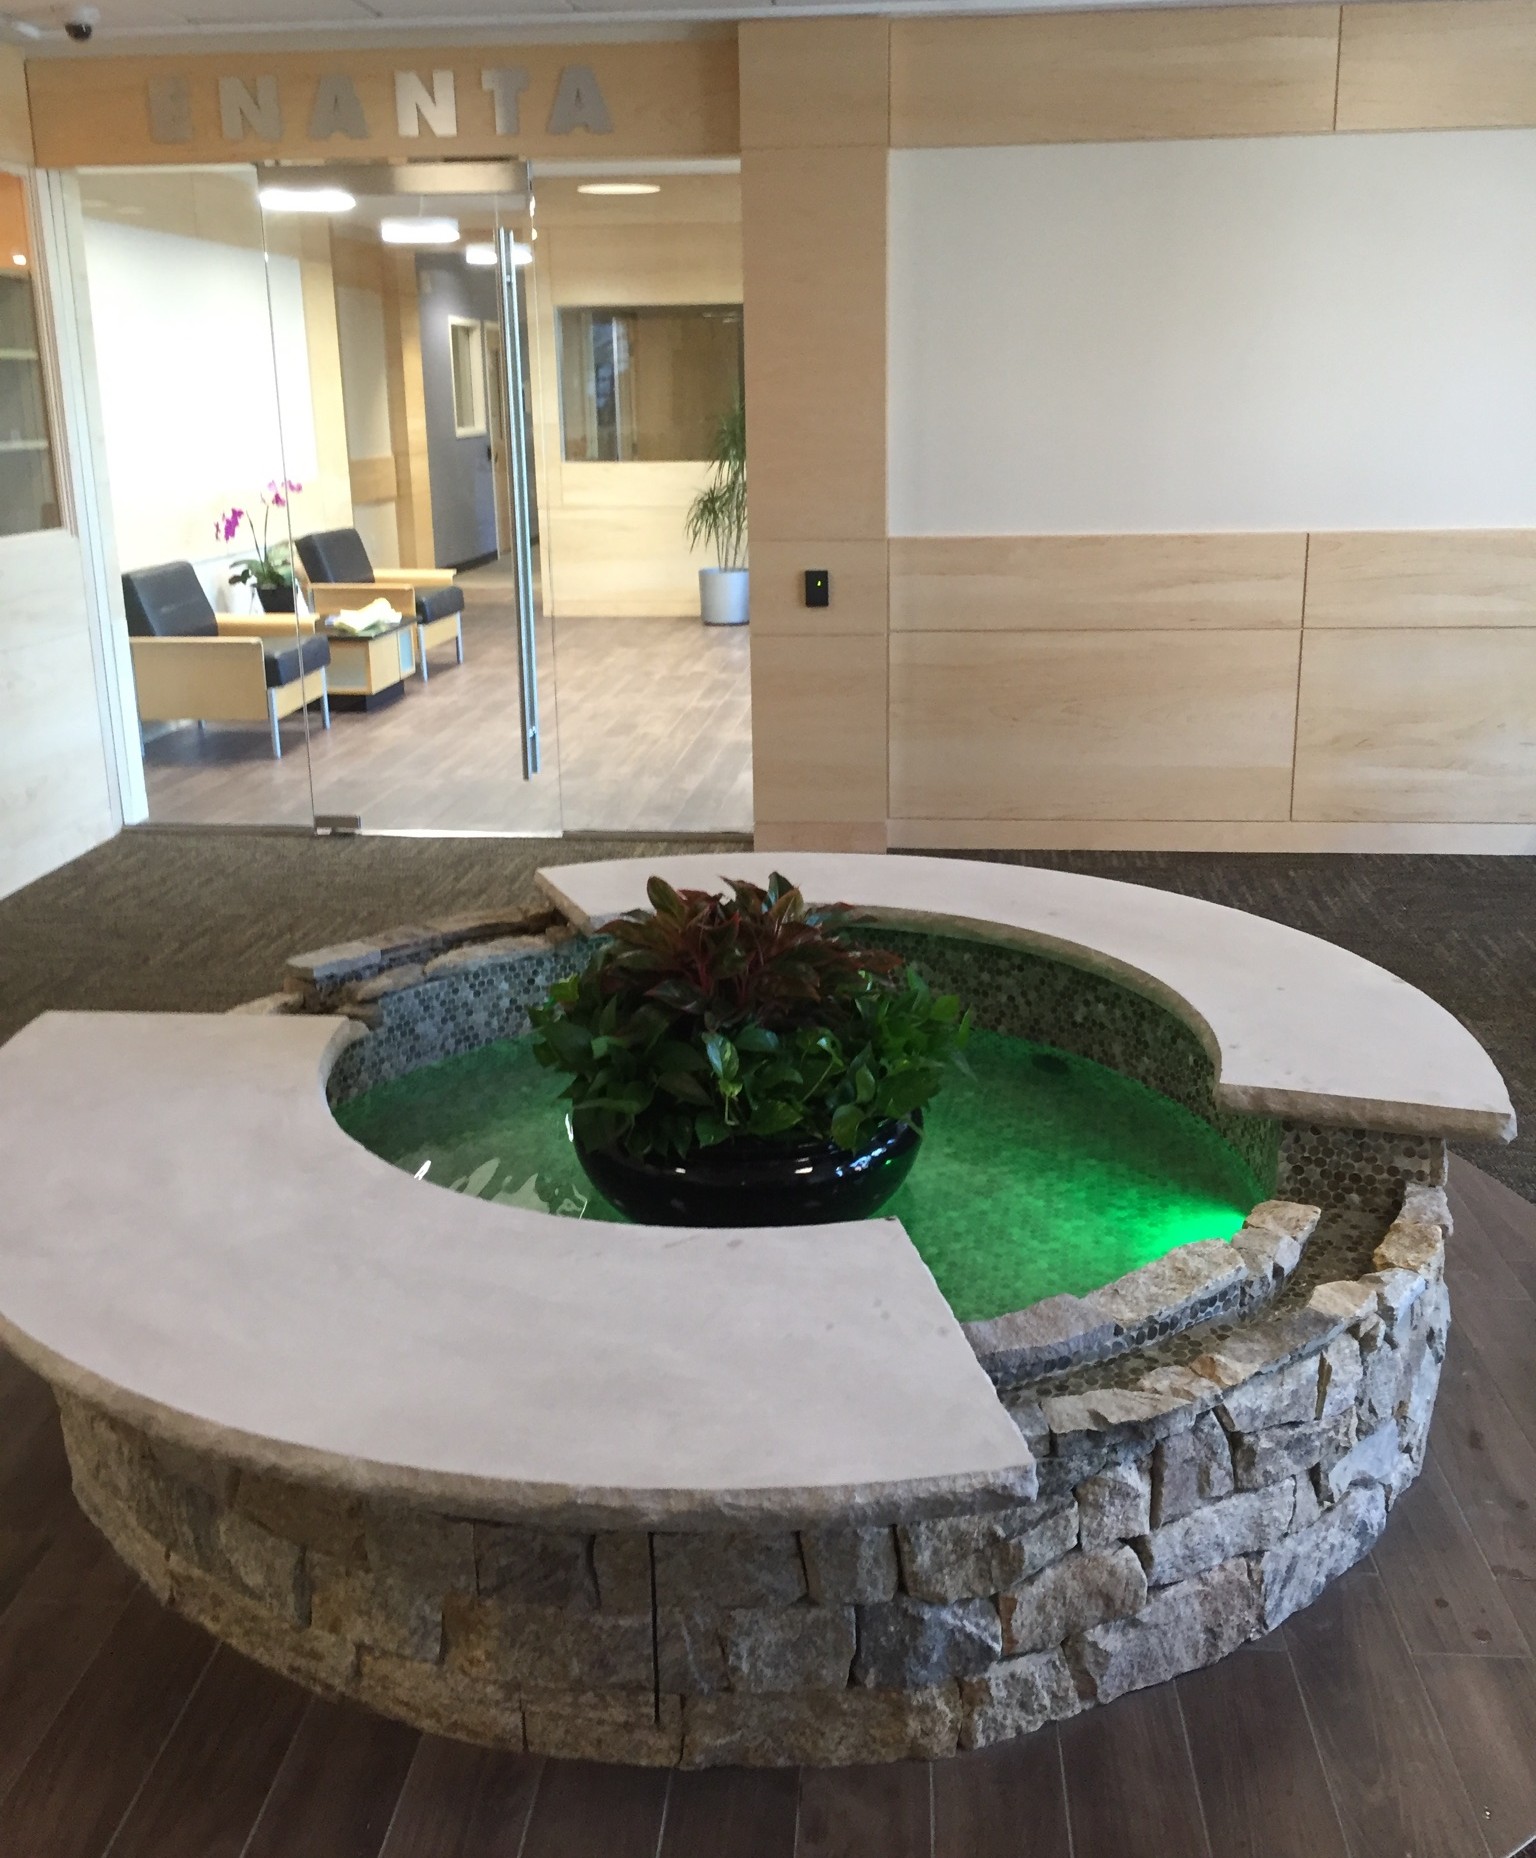 Lobby water feature